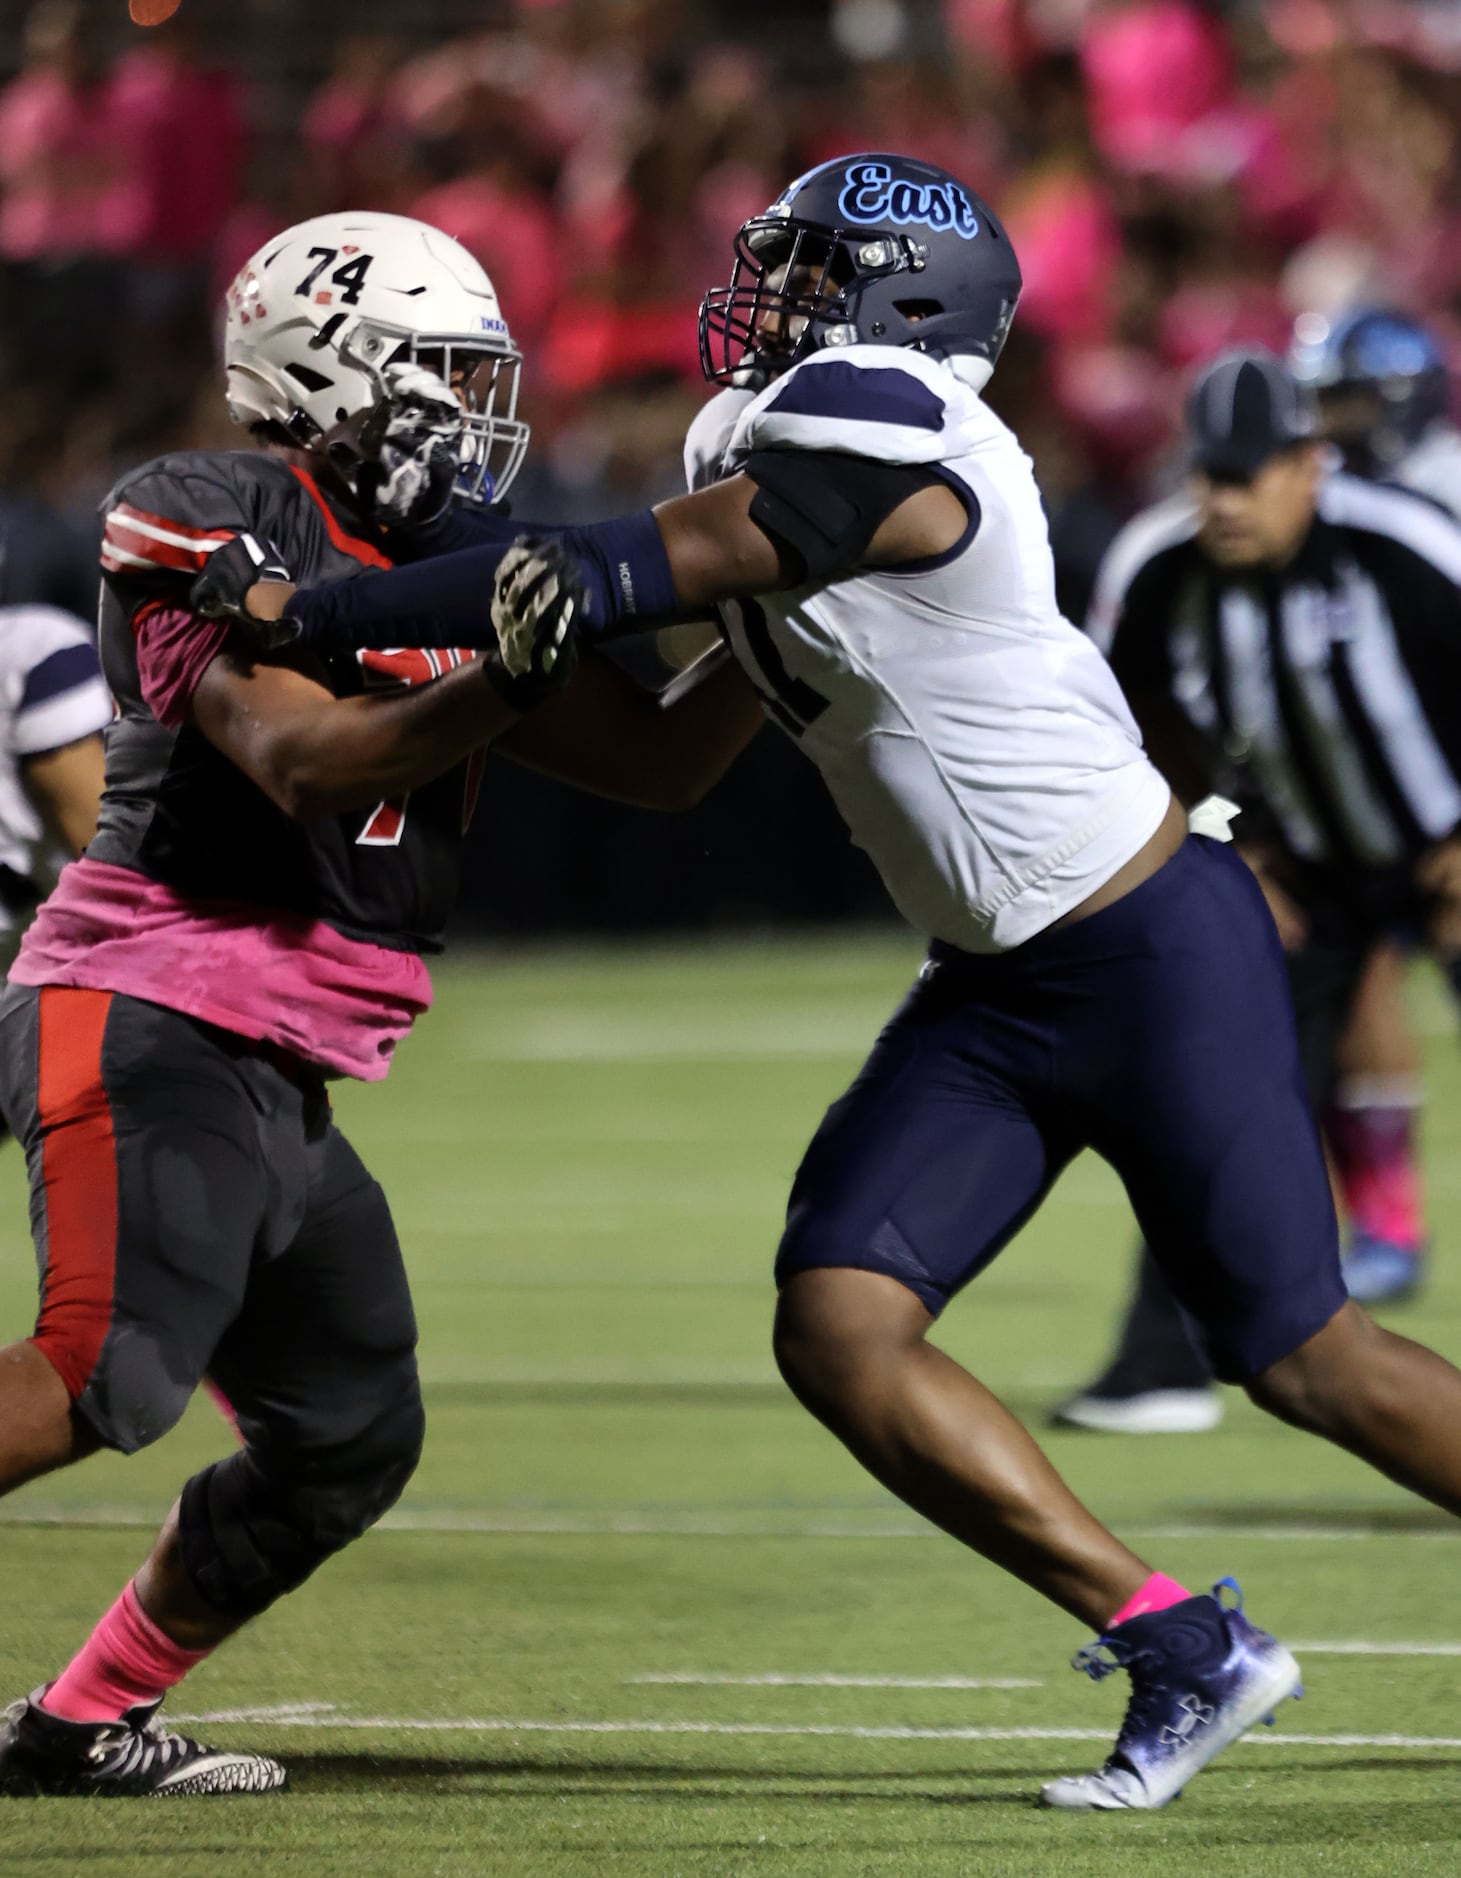 Wylie East high defender Anthony James (47) battles with South Garland high lineman Darwin...